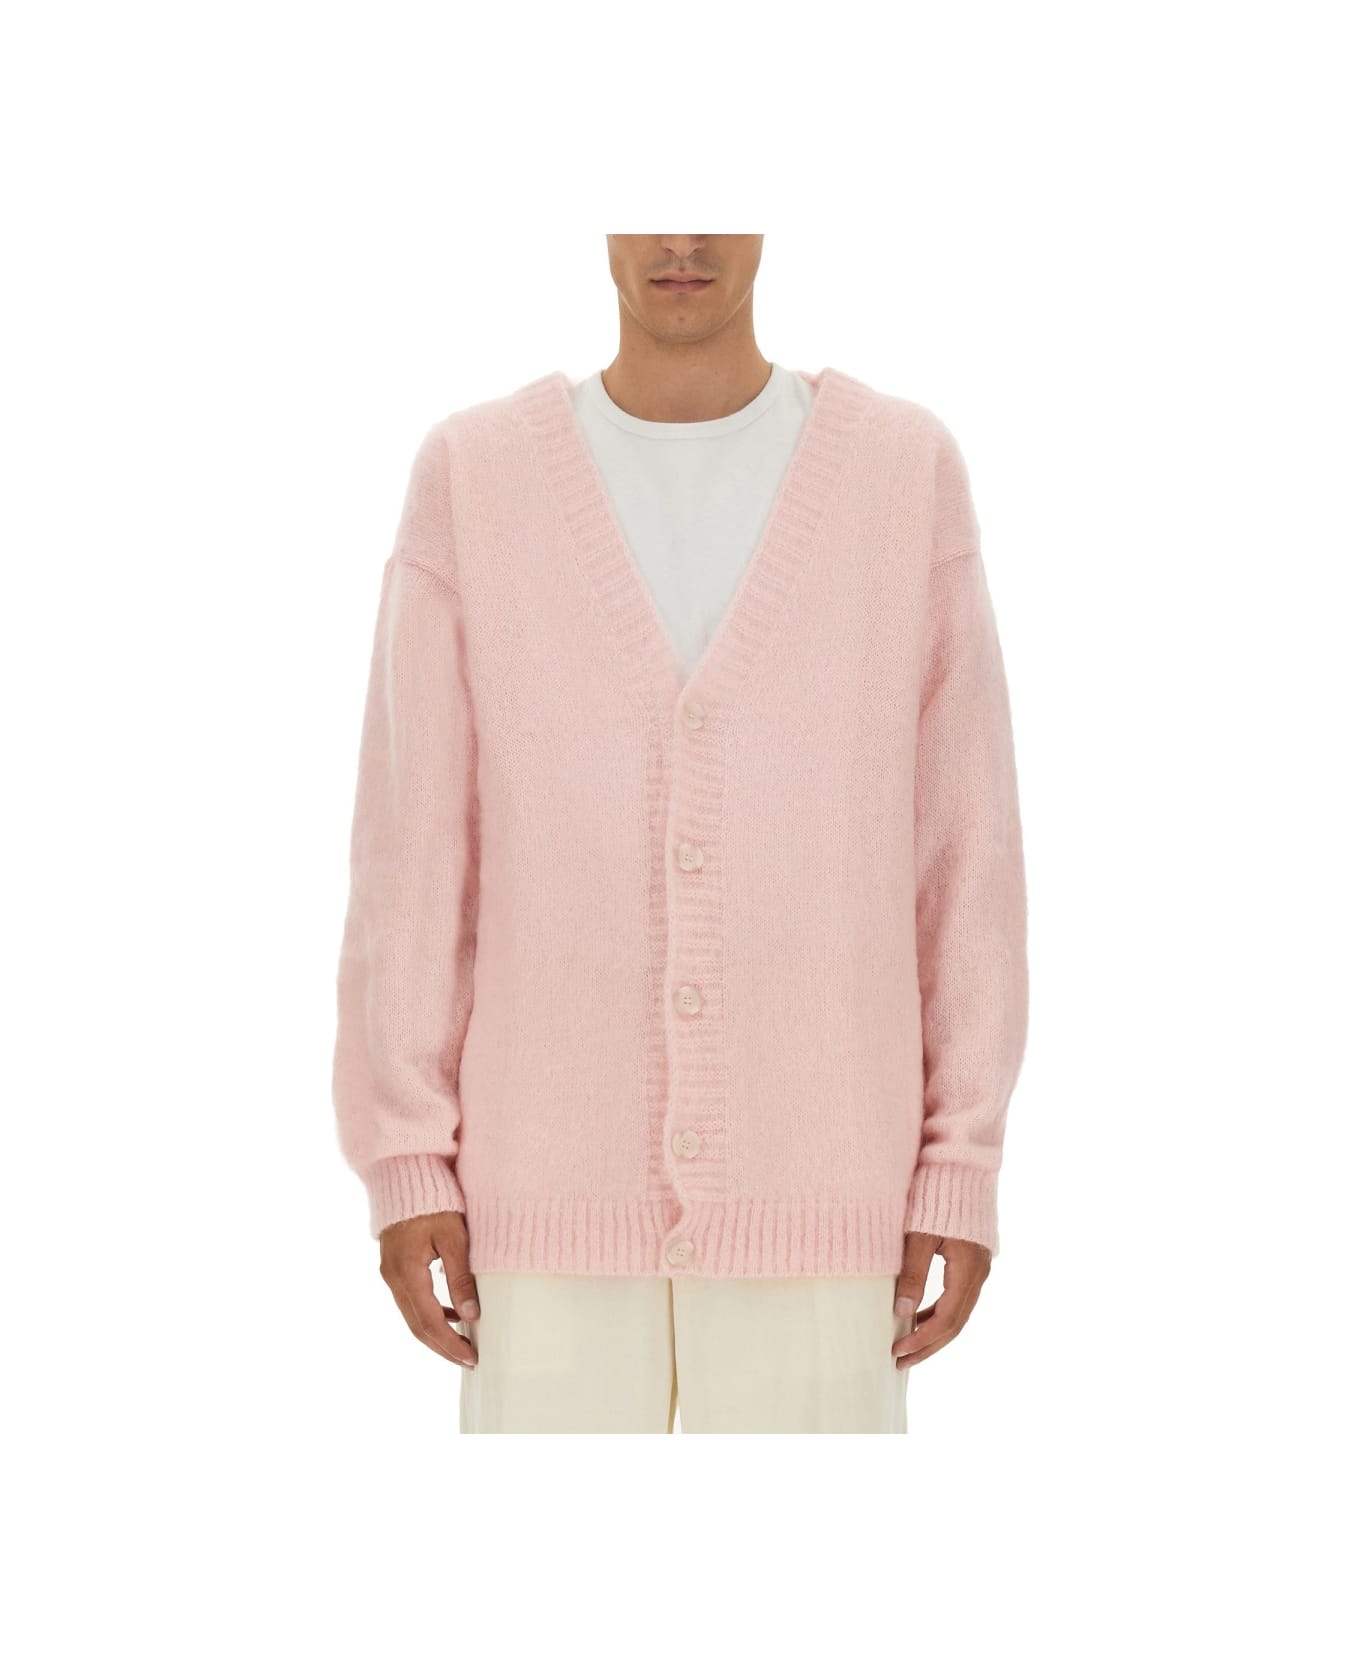 Family First Milano Mohair Cardigan - PINK カーディガン